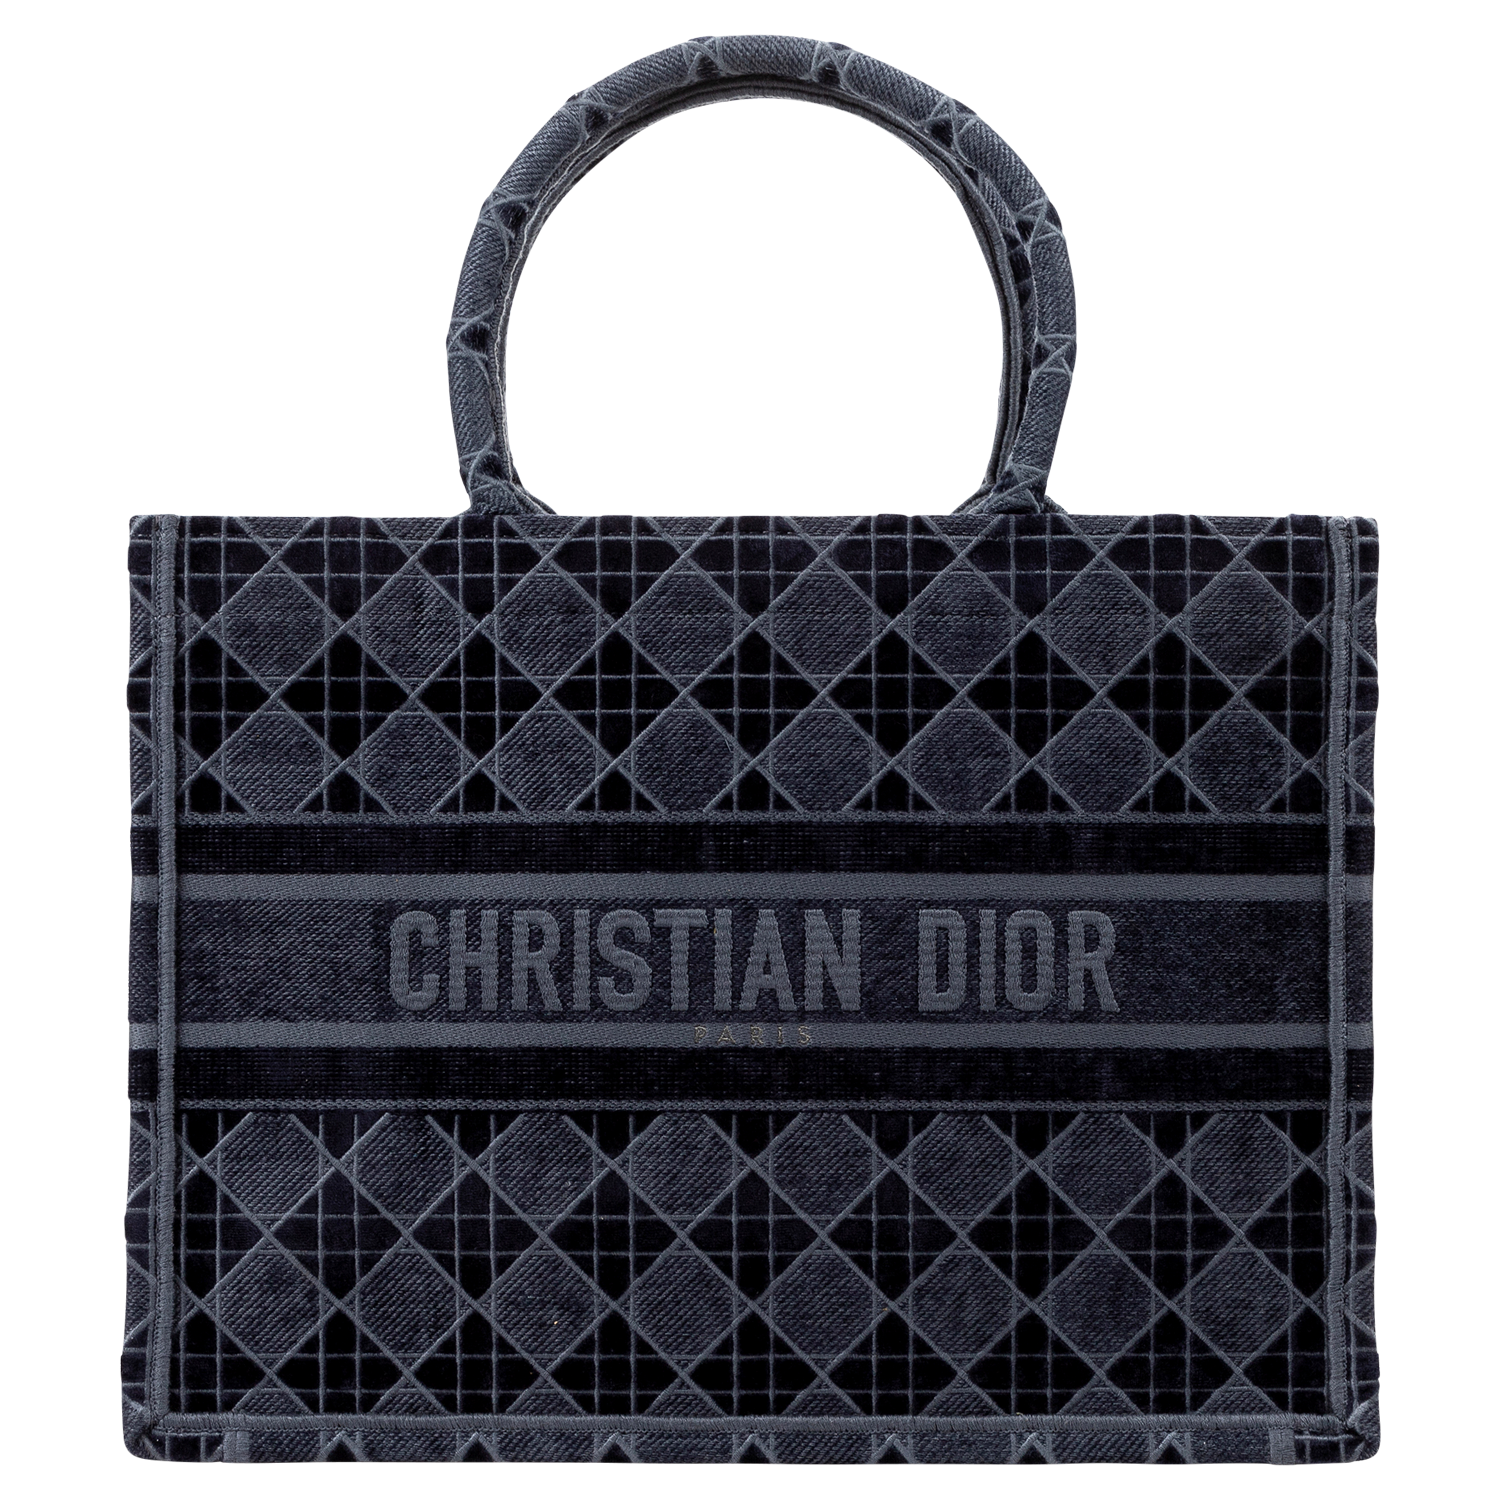 Christian Dior 2019 Blue Cannage Velvet Embroidered Book Tote